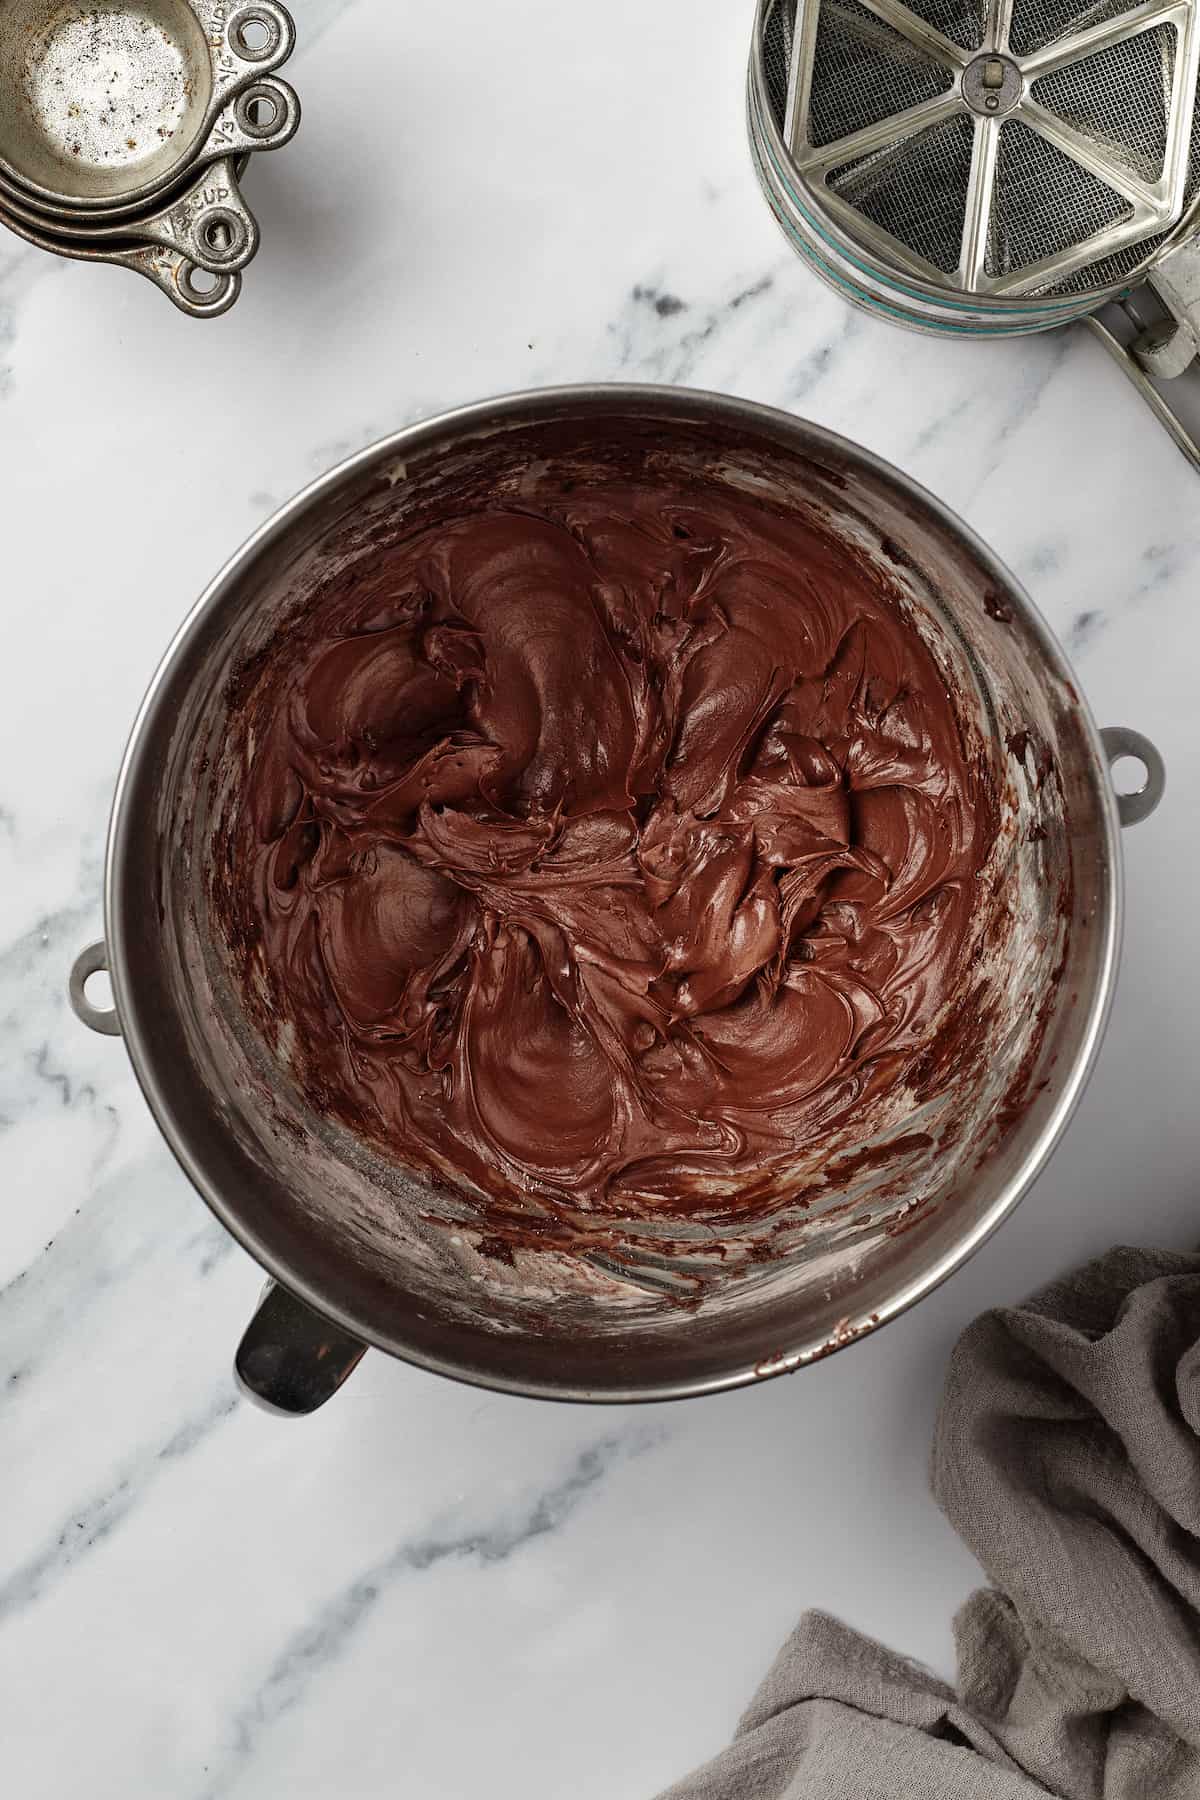 A metal mixing bowl full of homemade chocolate frosting